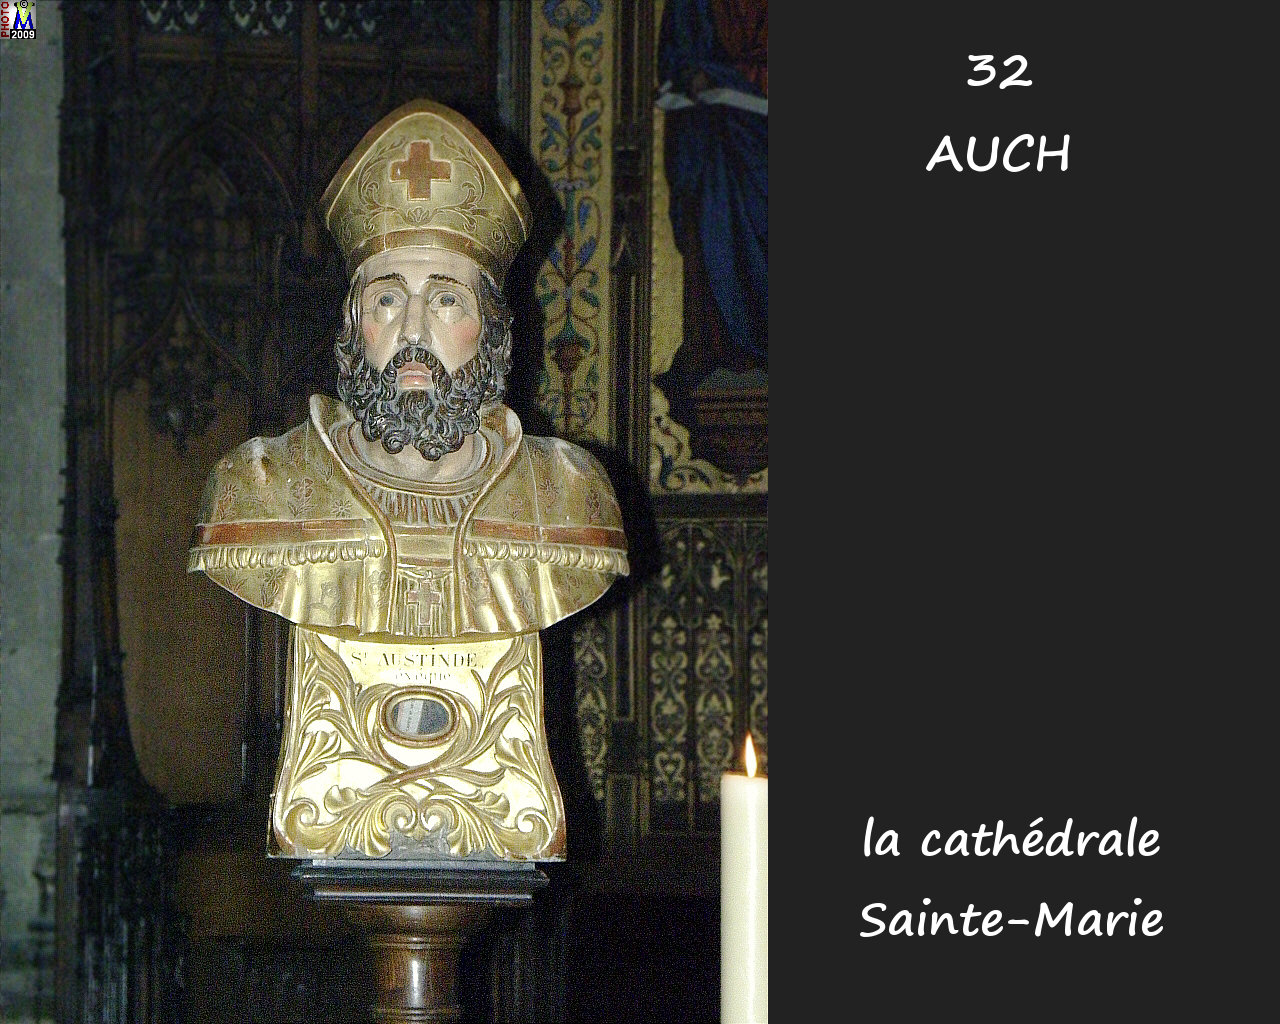 32AUCH_cathedrale_258.jpg